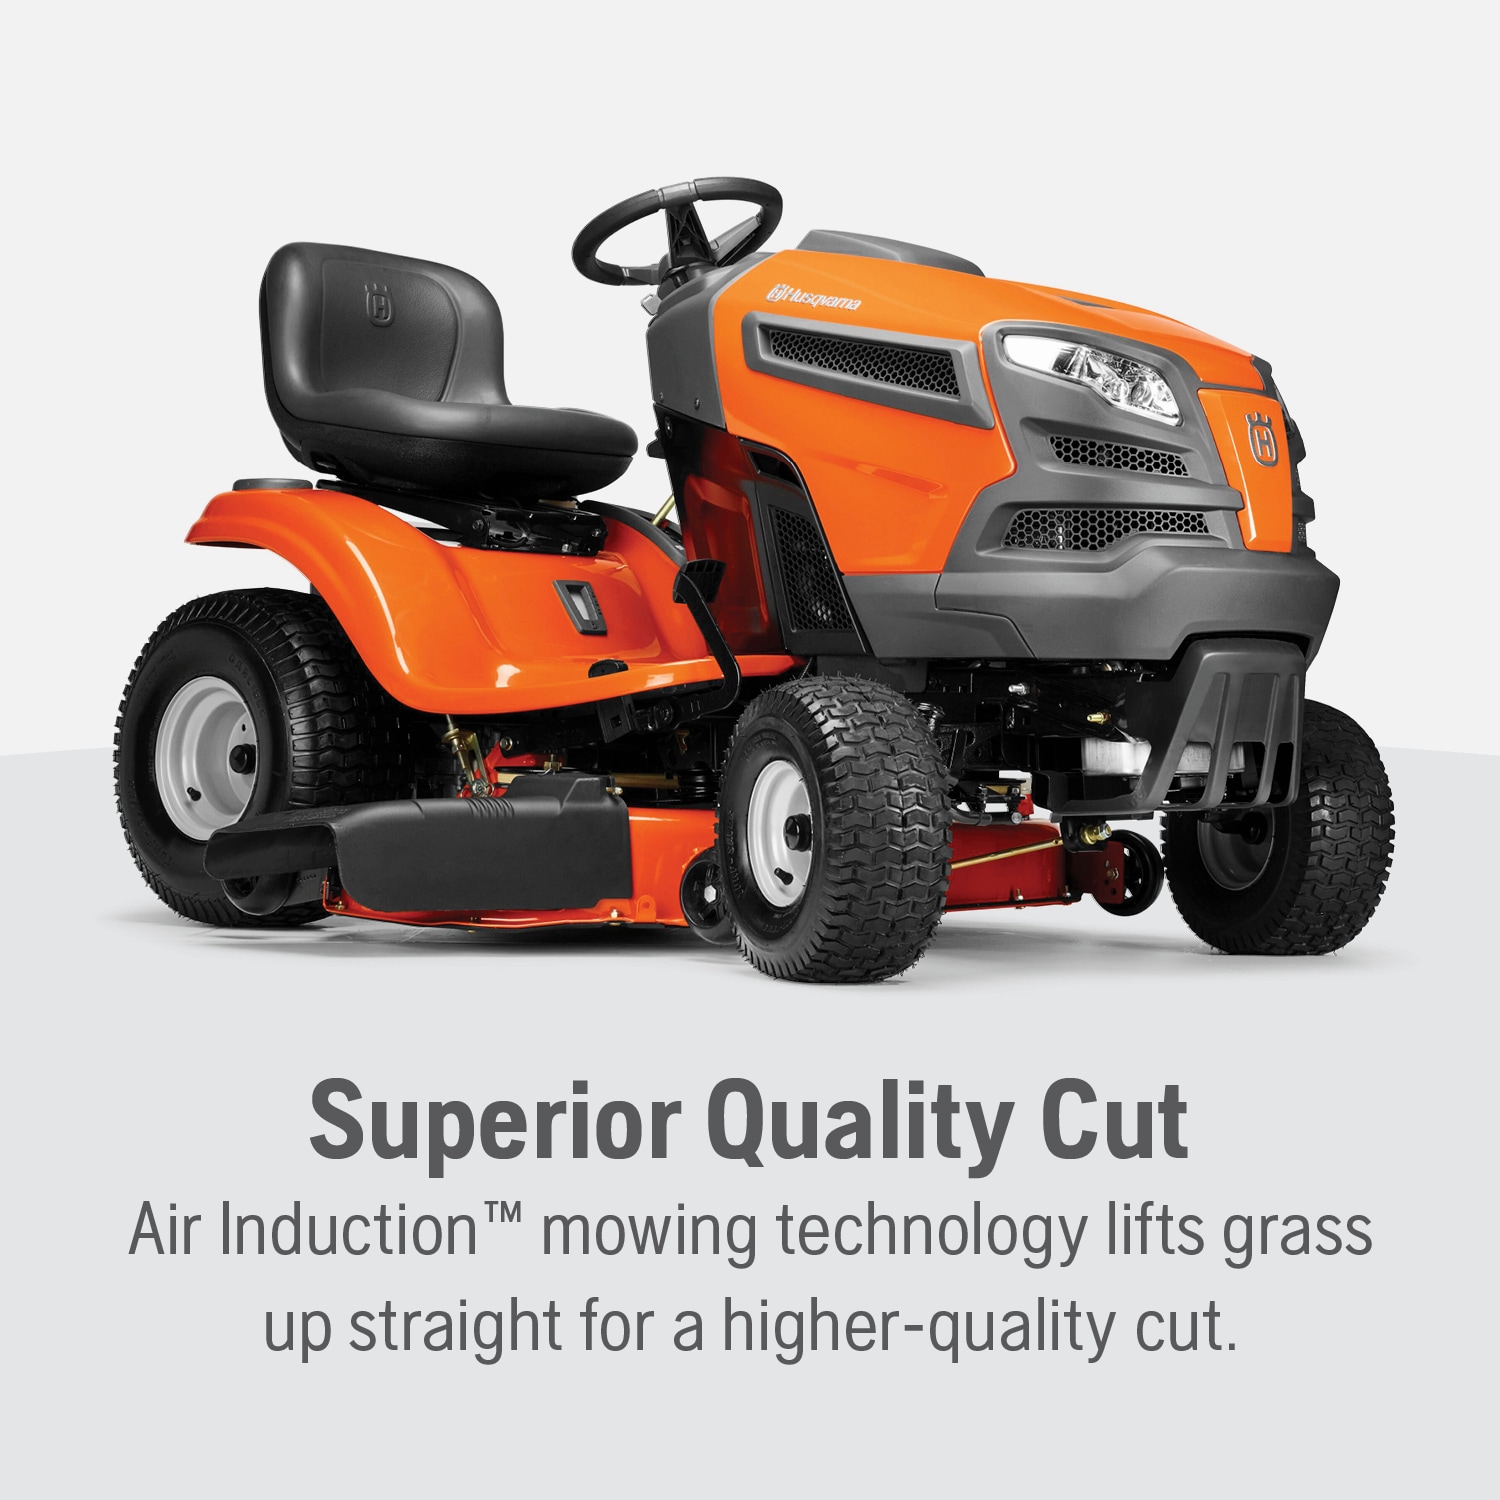 How to Install Deck on Husqvarna Riding Mower  : Step-by-Step Guide